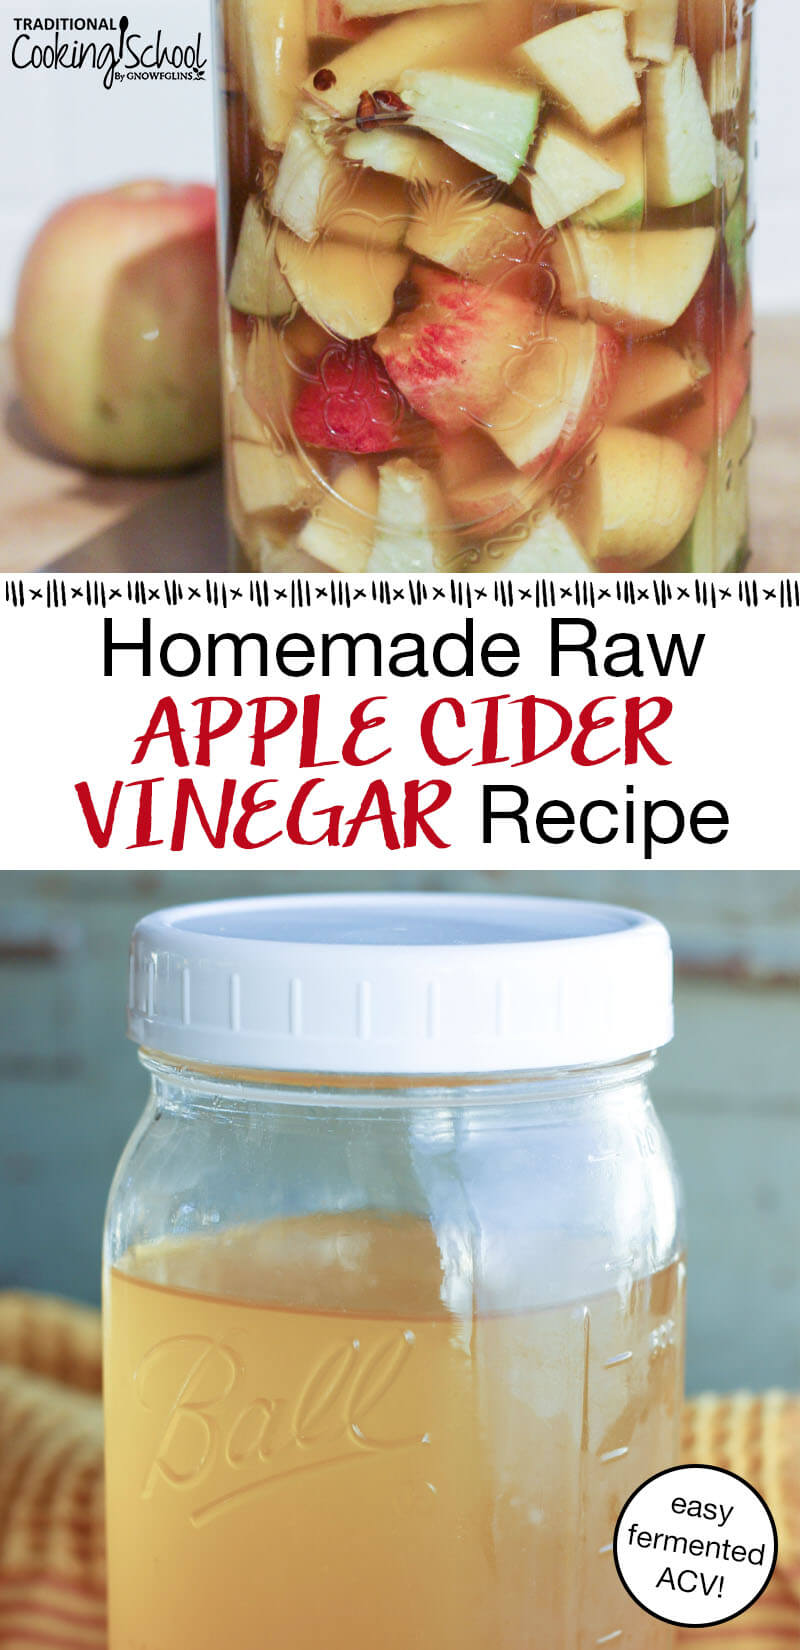 photo collage of glass jars filled with honey-colored liquid and apple chunks, with text overlay: "Homemade Raw Apple Cider Vinegar Recipe (easy fermented ACV!)"